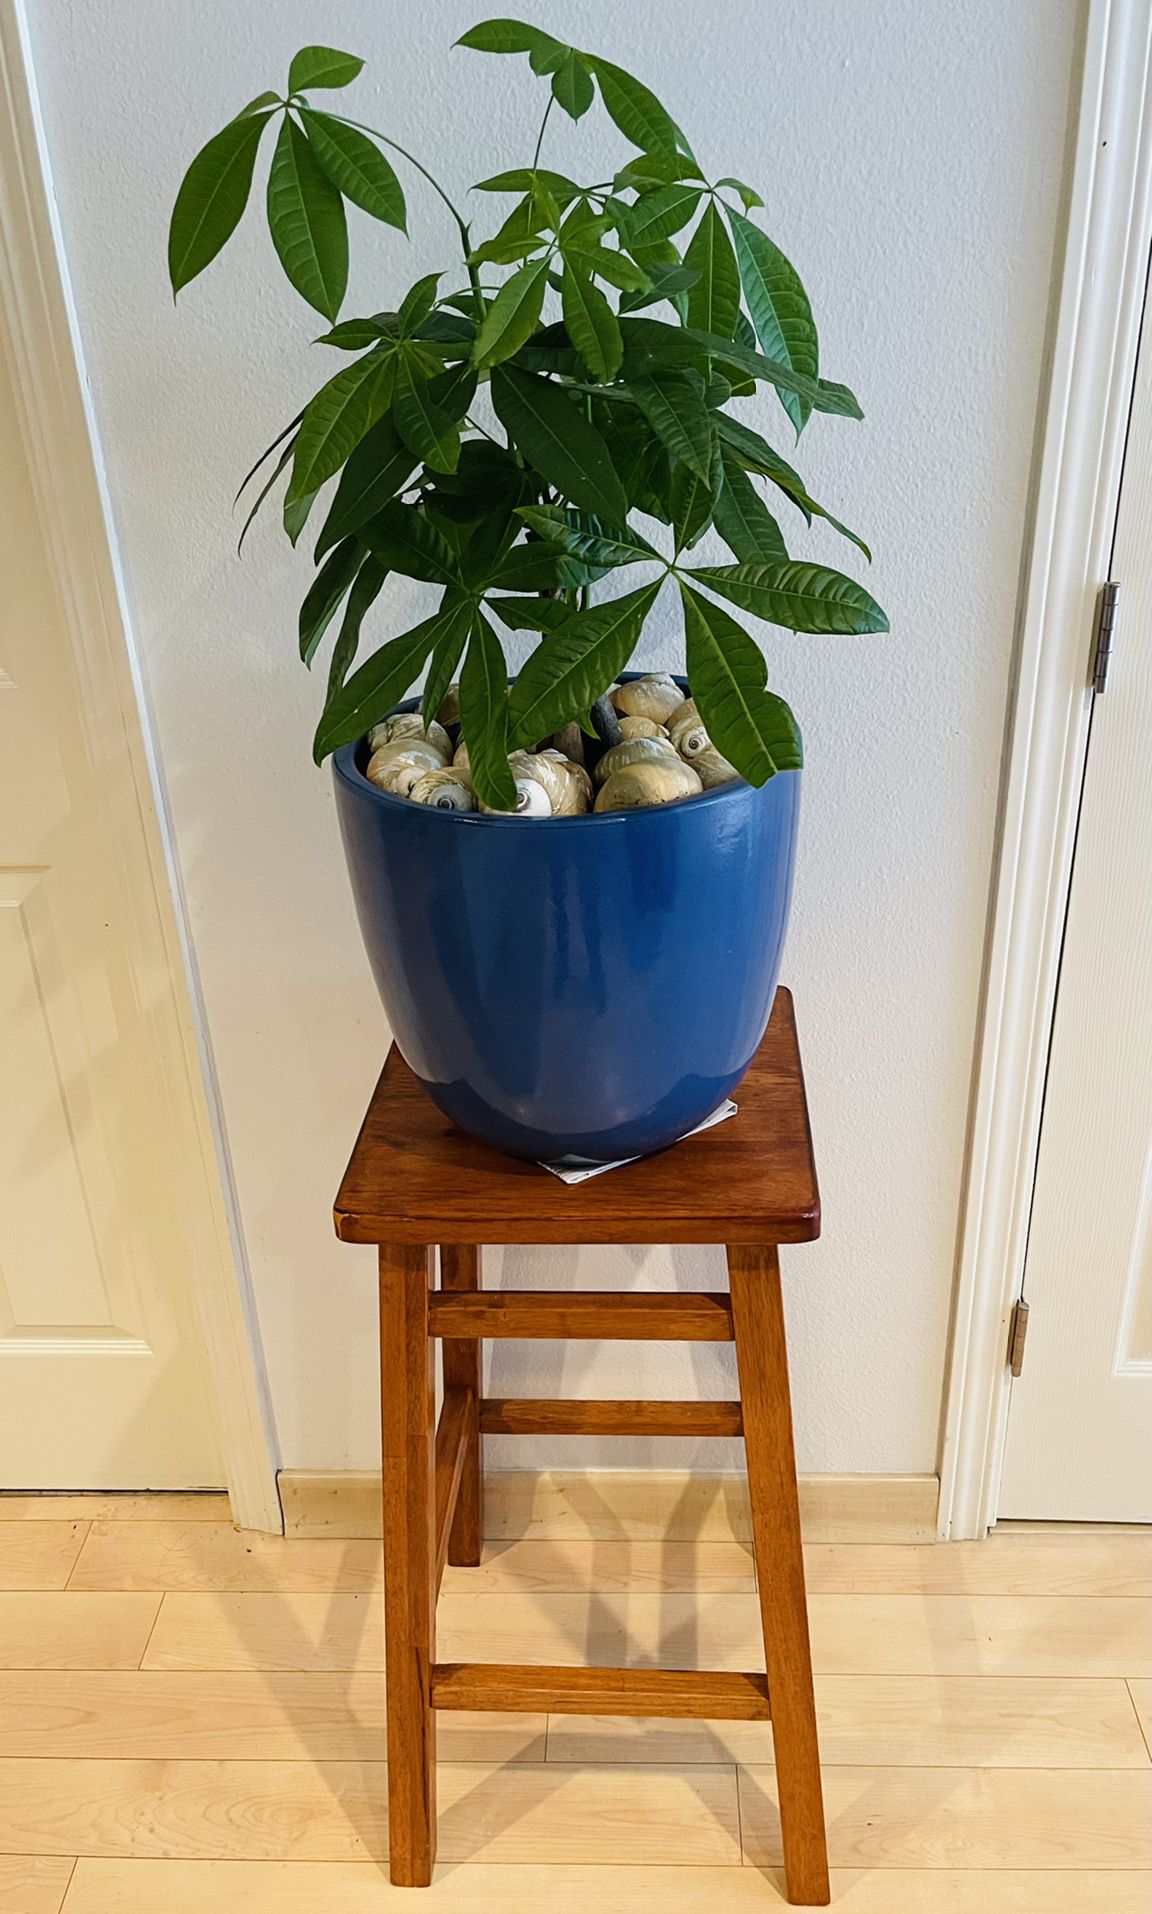 29” Wooden Stool Or Plant Stand